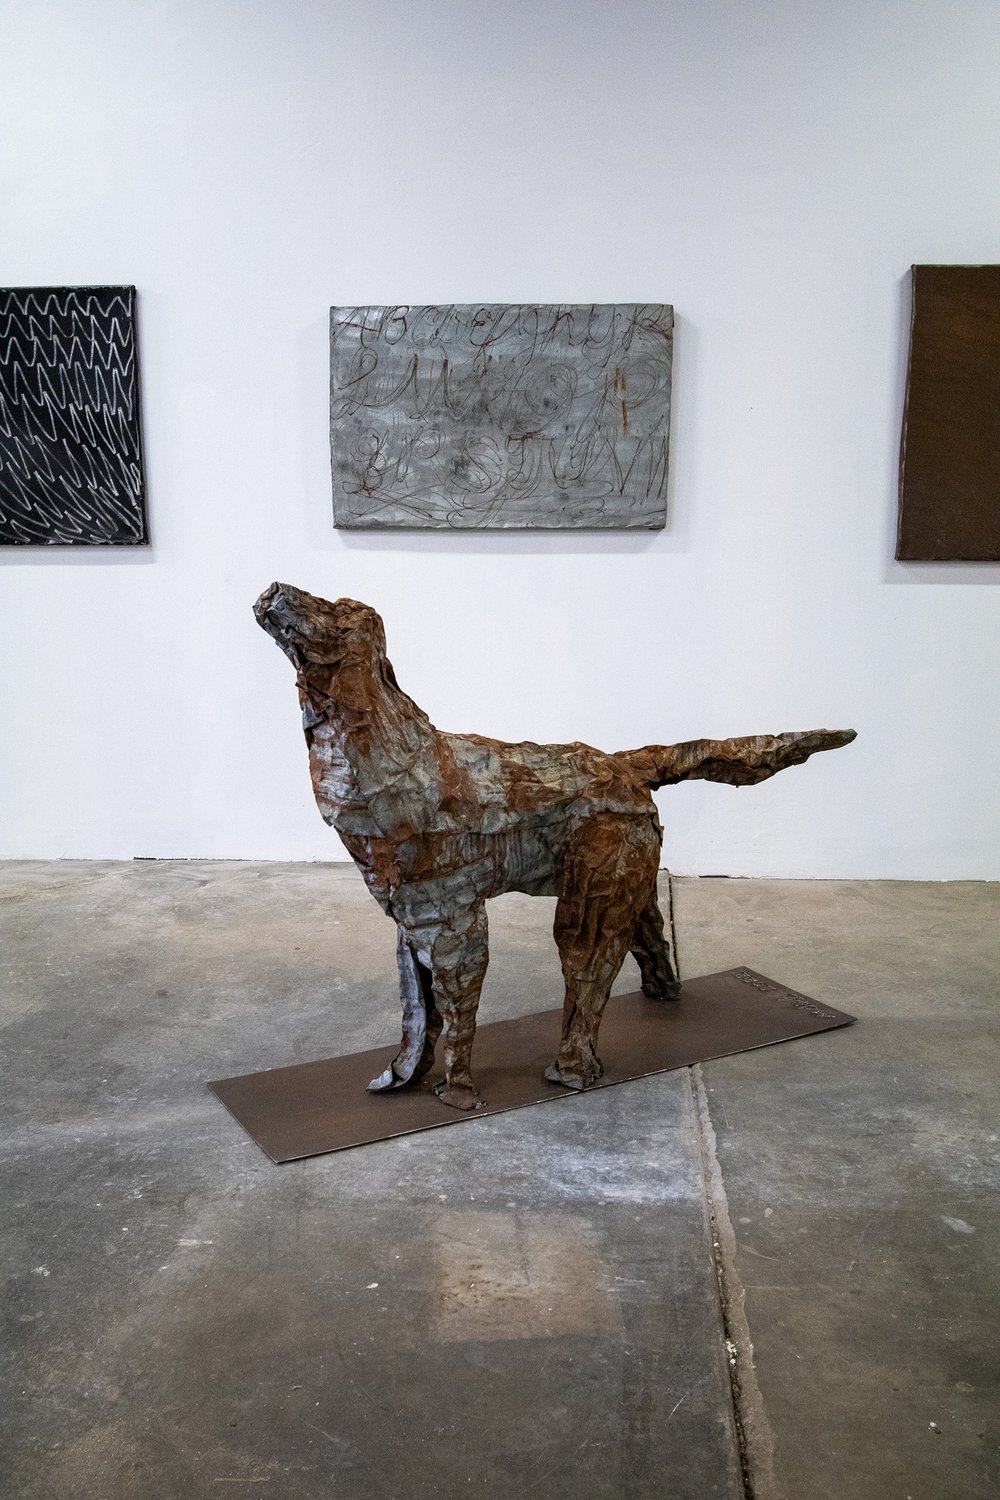 Sculptor Mike Sirl's studio and gallery - August 2022